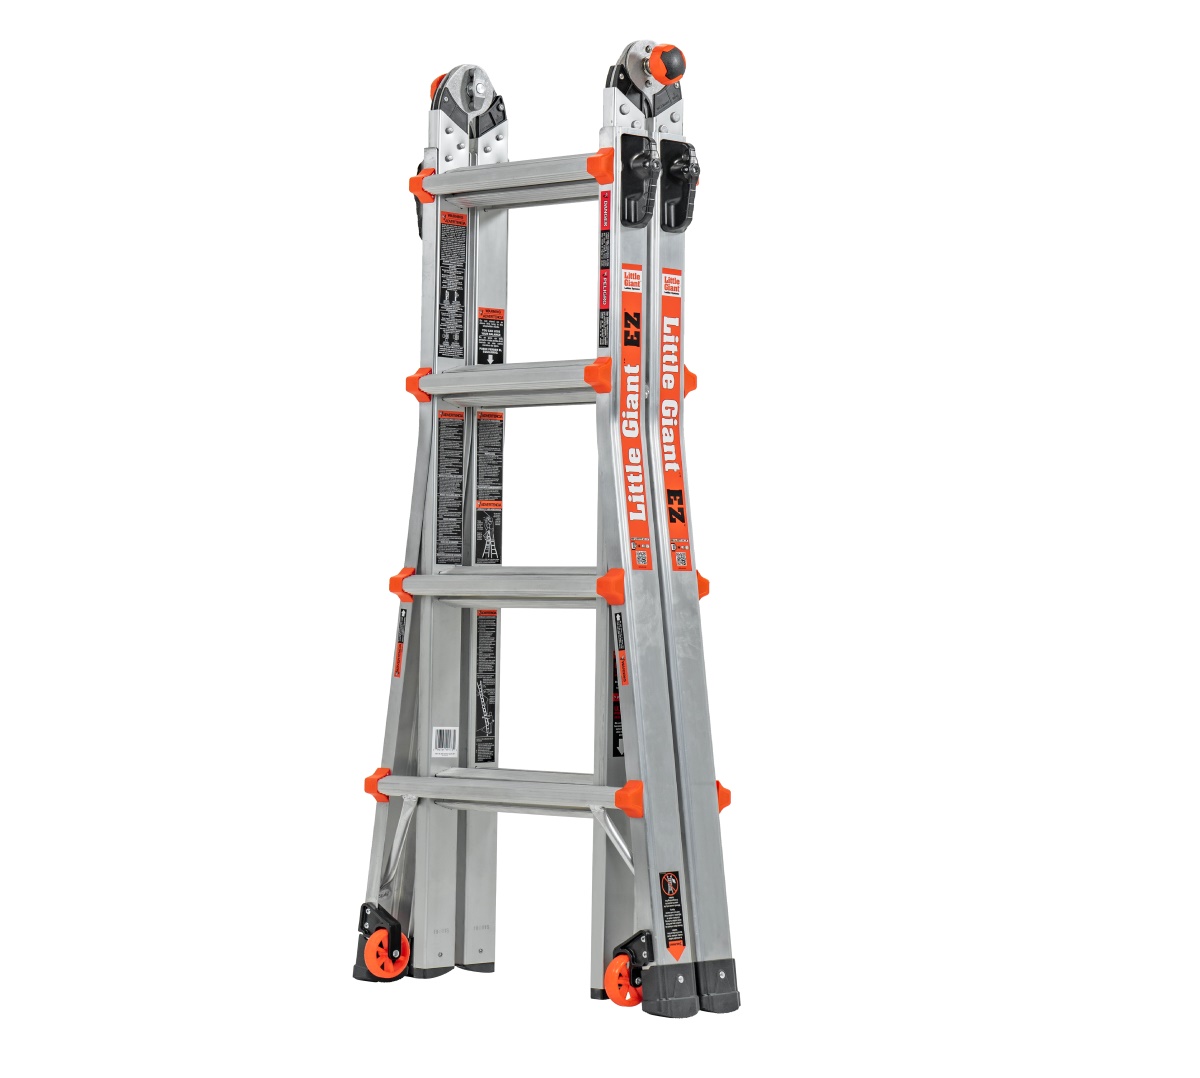 Where To Buy The Little Giant Ladder